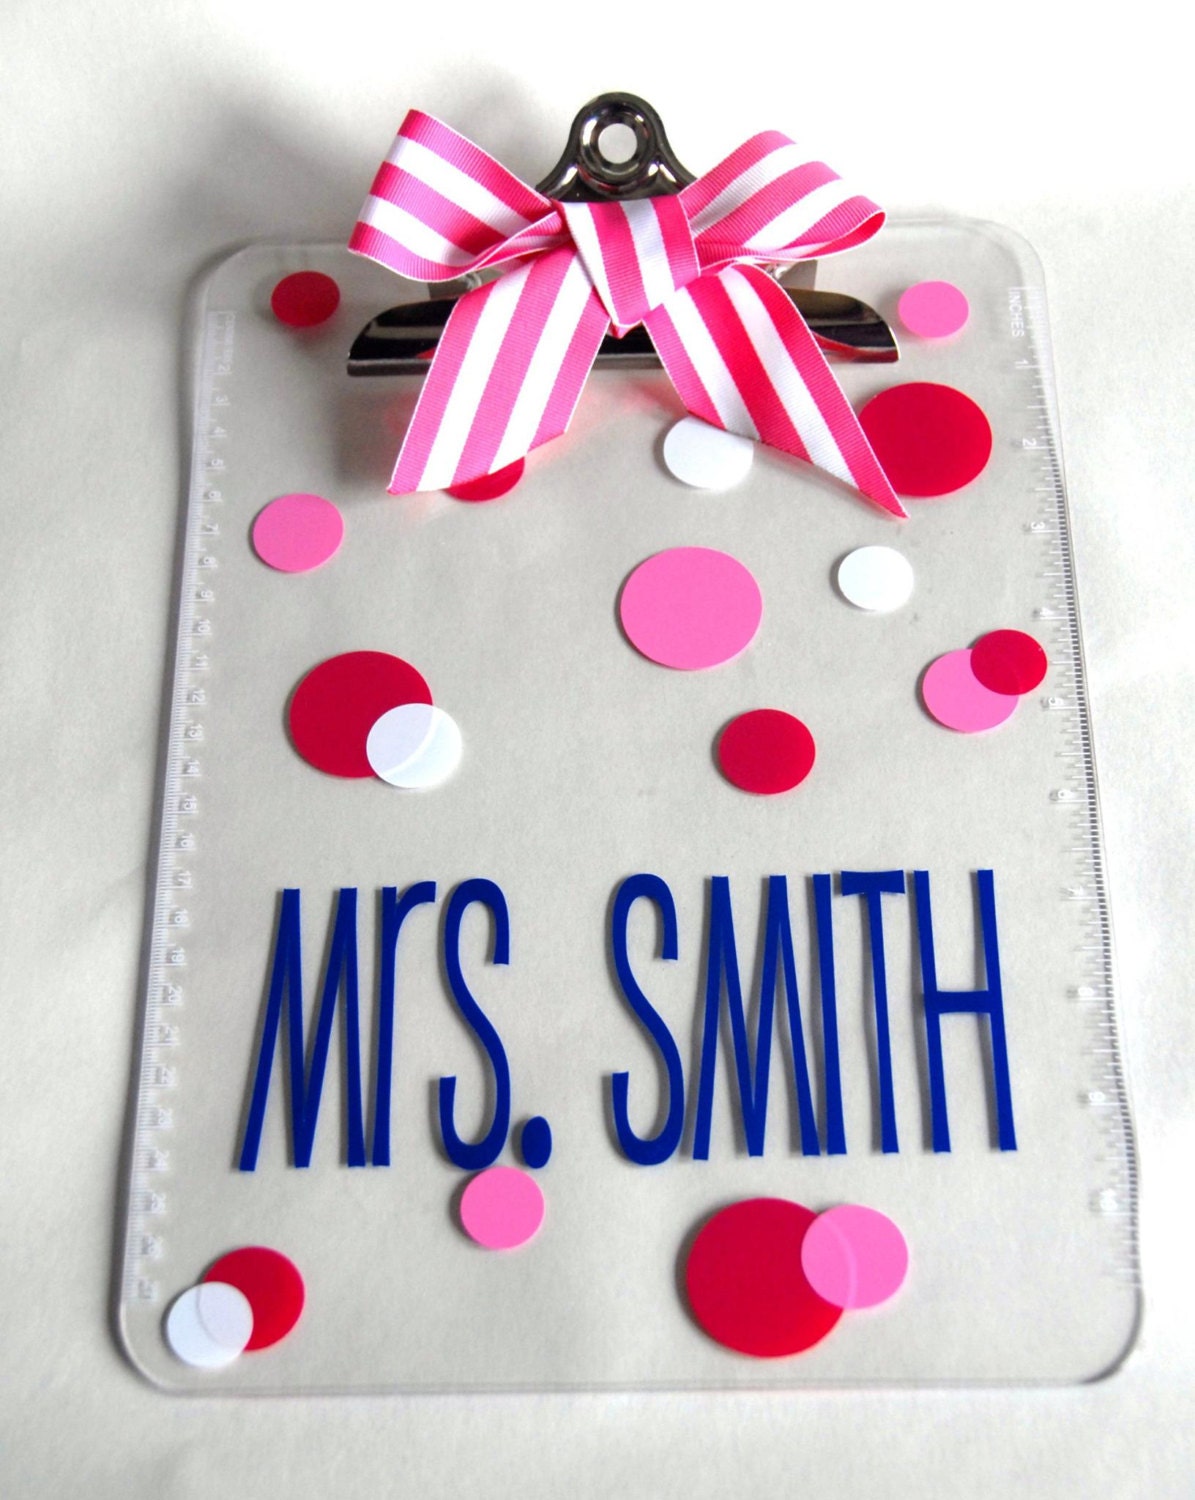 Personalized Teacher Clipboards